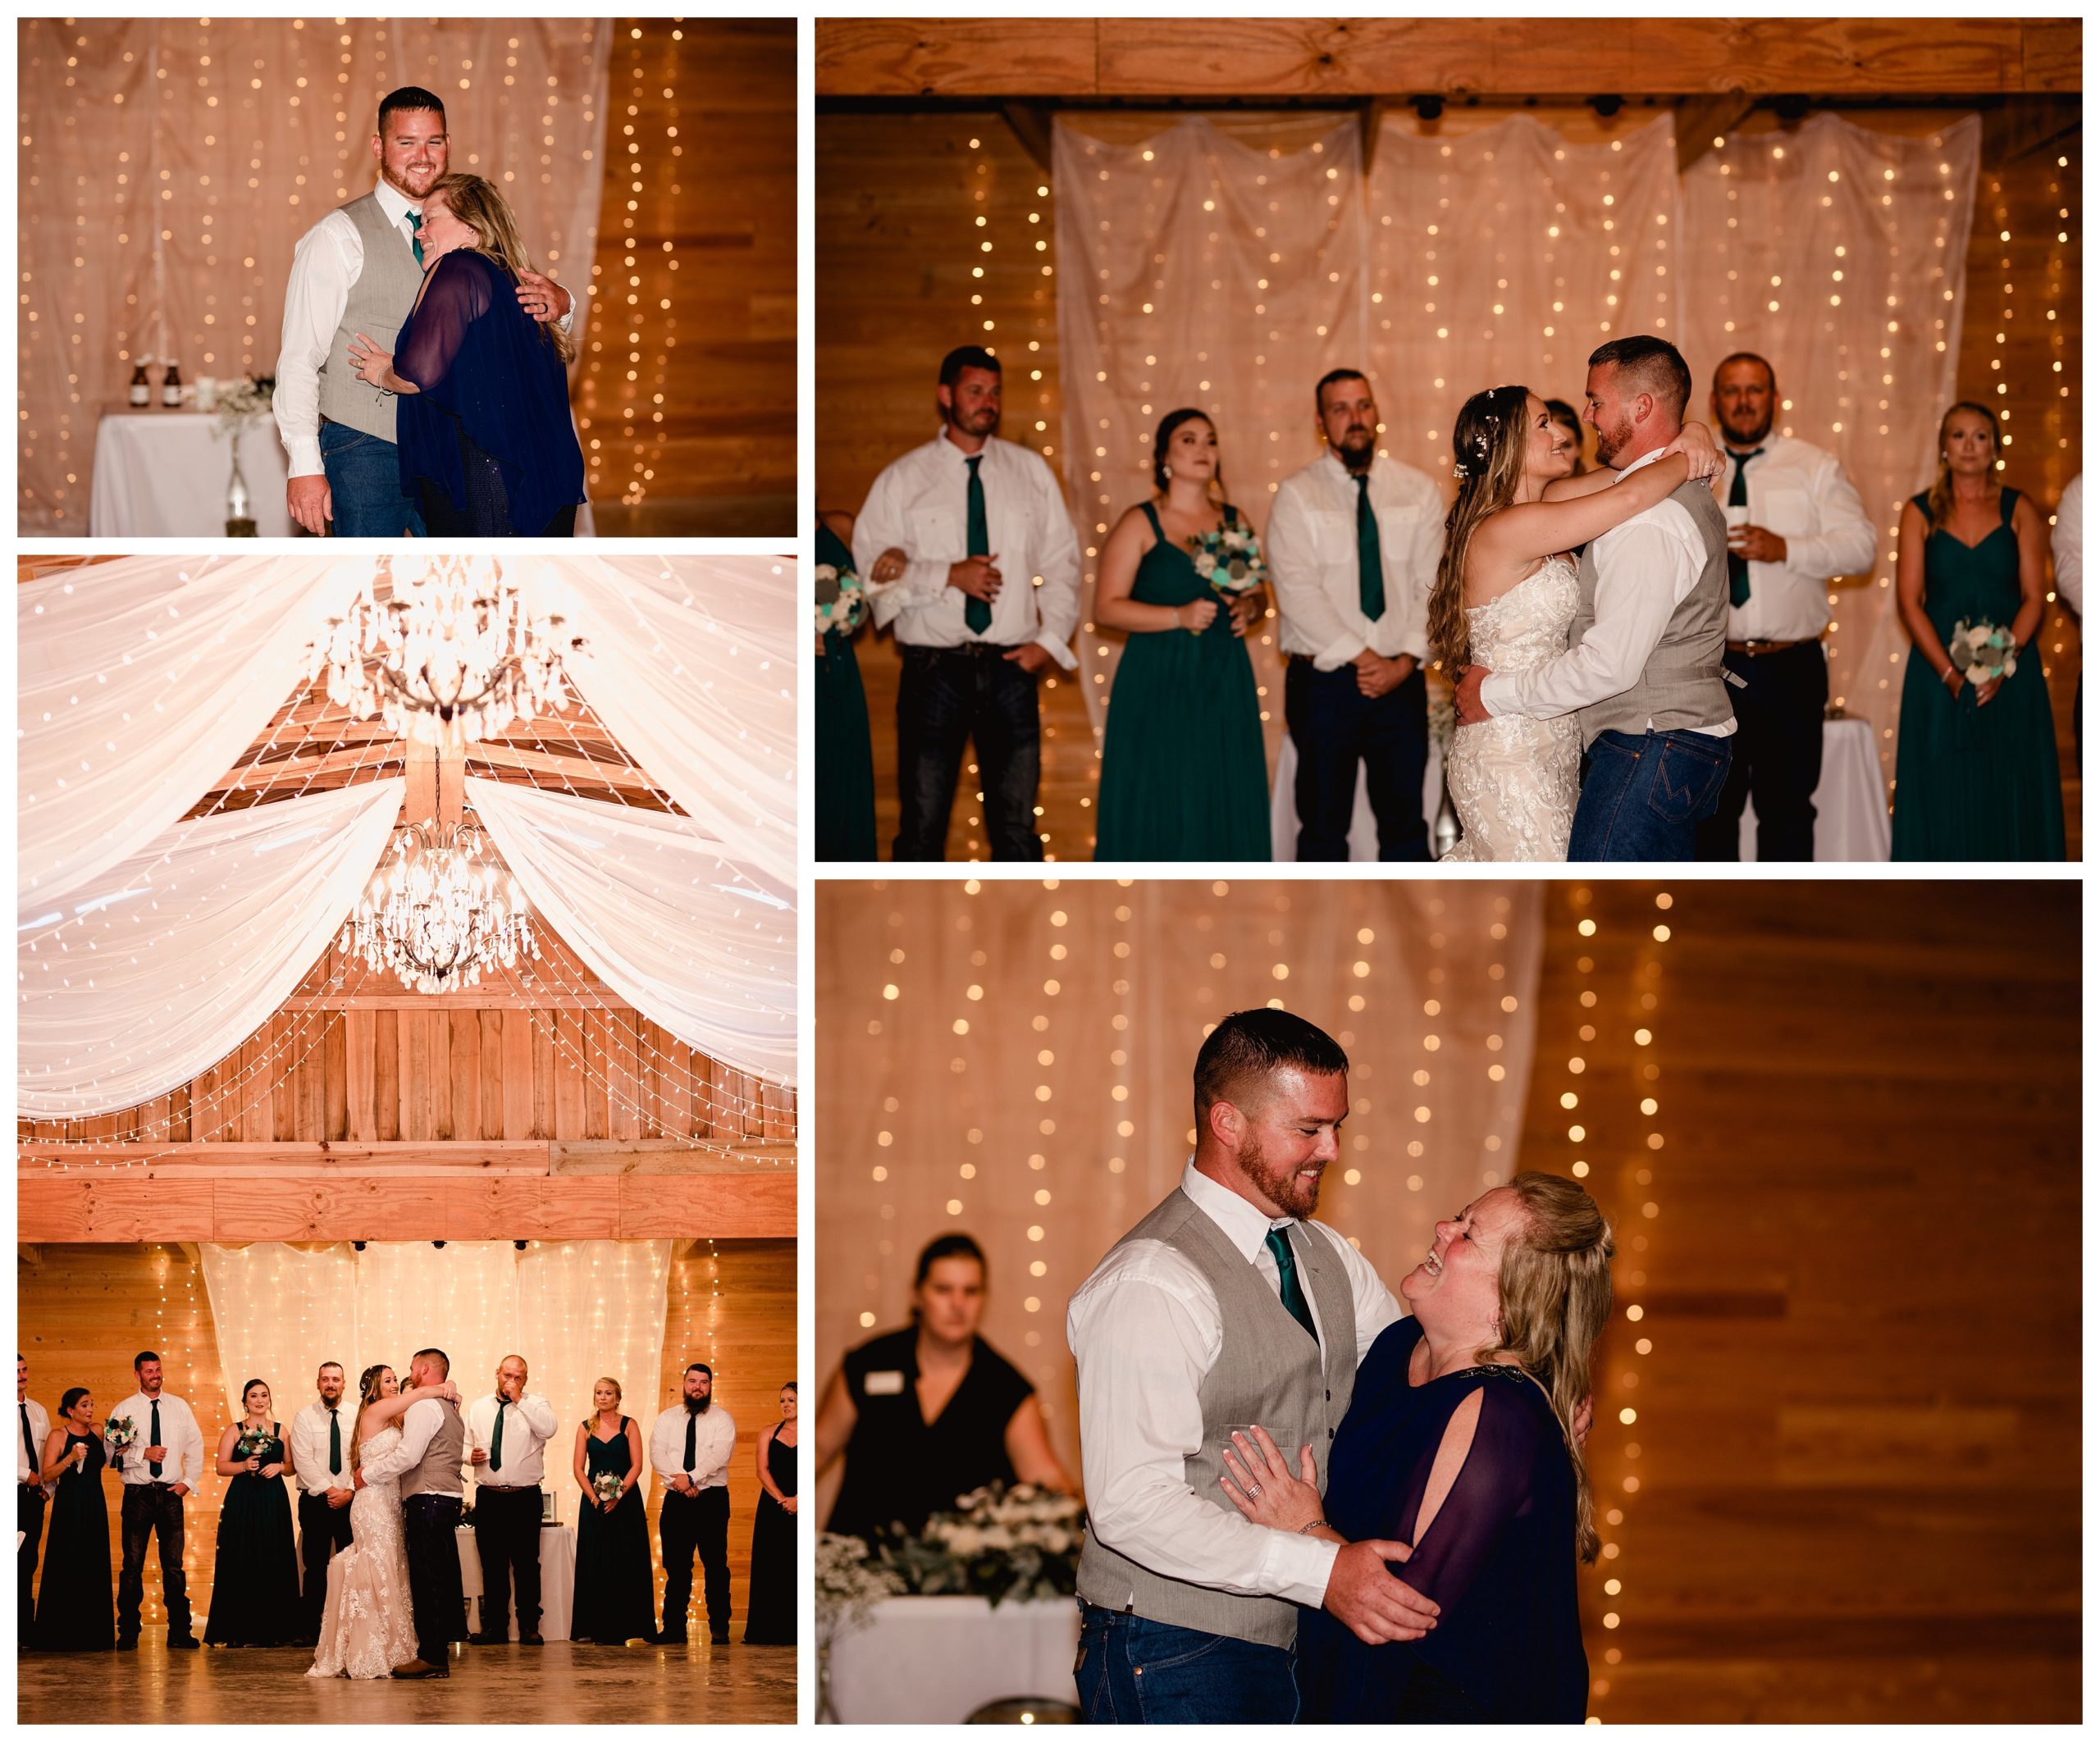 Wedding reception events including the first dance at Clark Plantation.